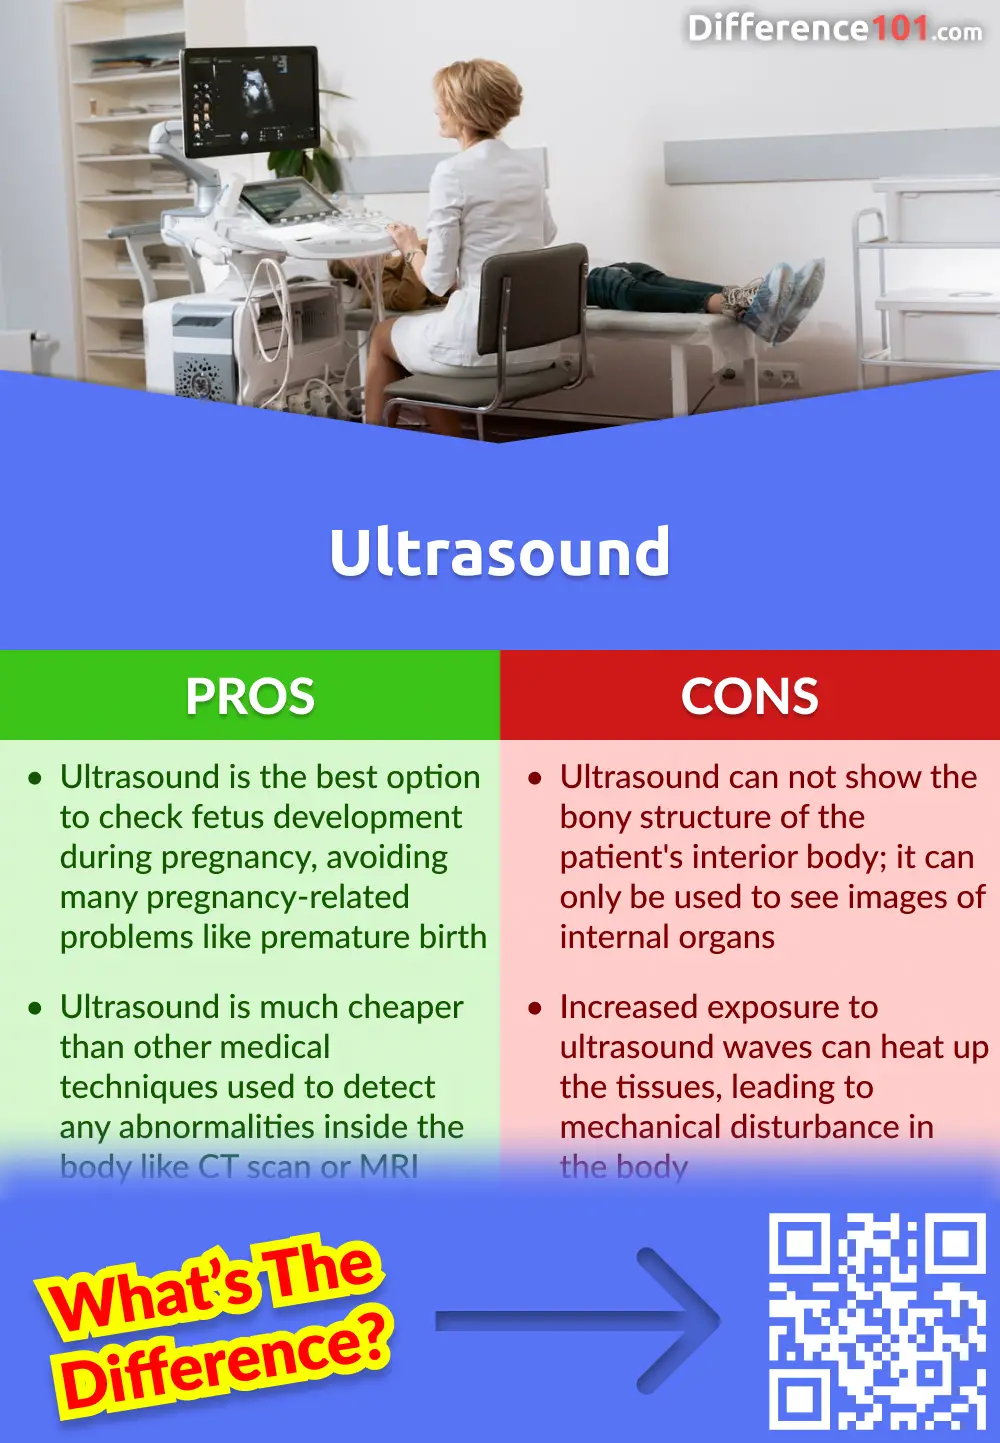 Ultrasound Pros and Cons